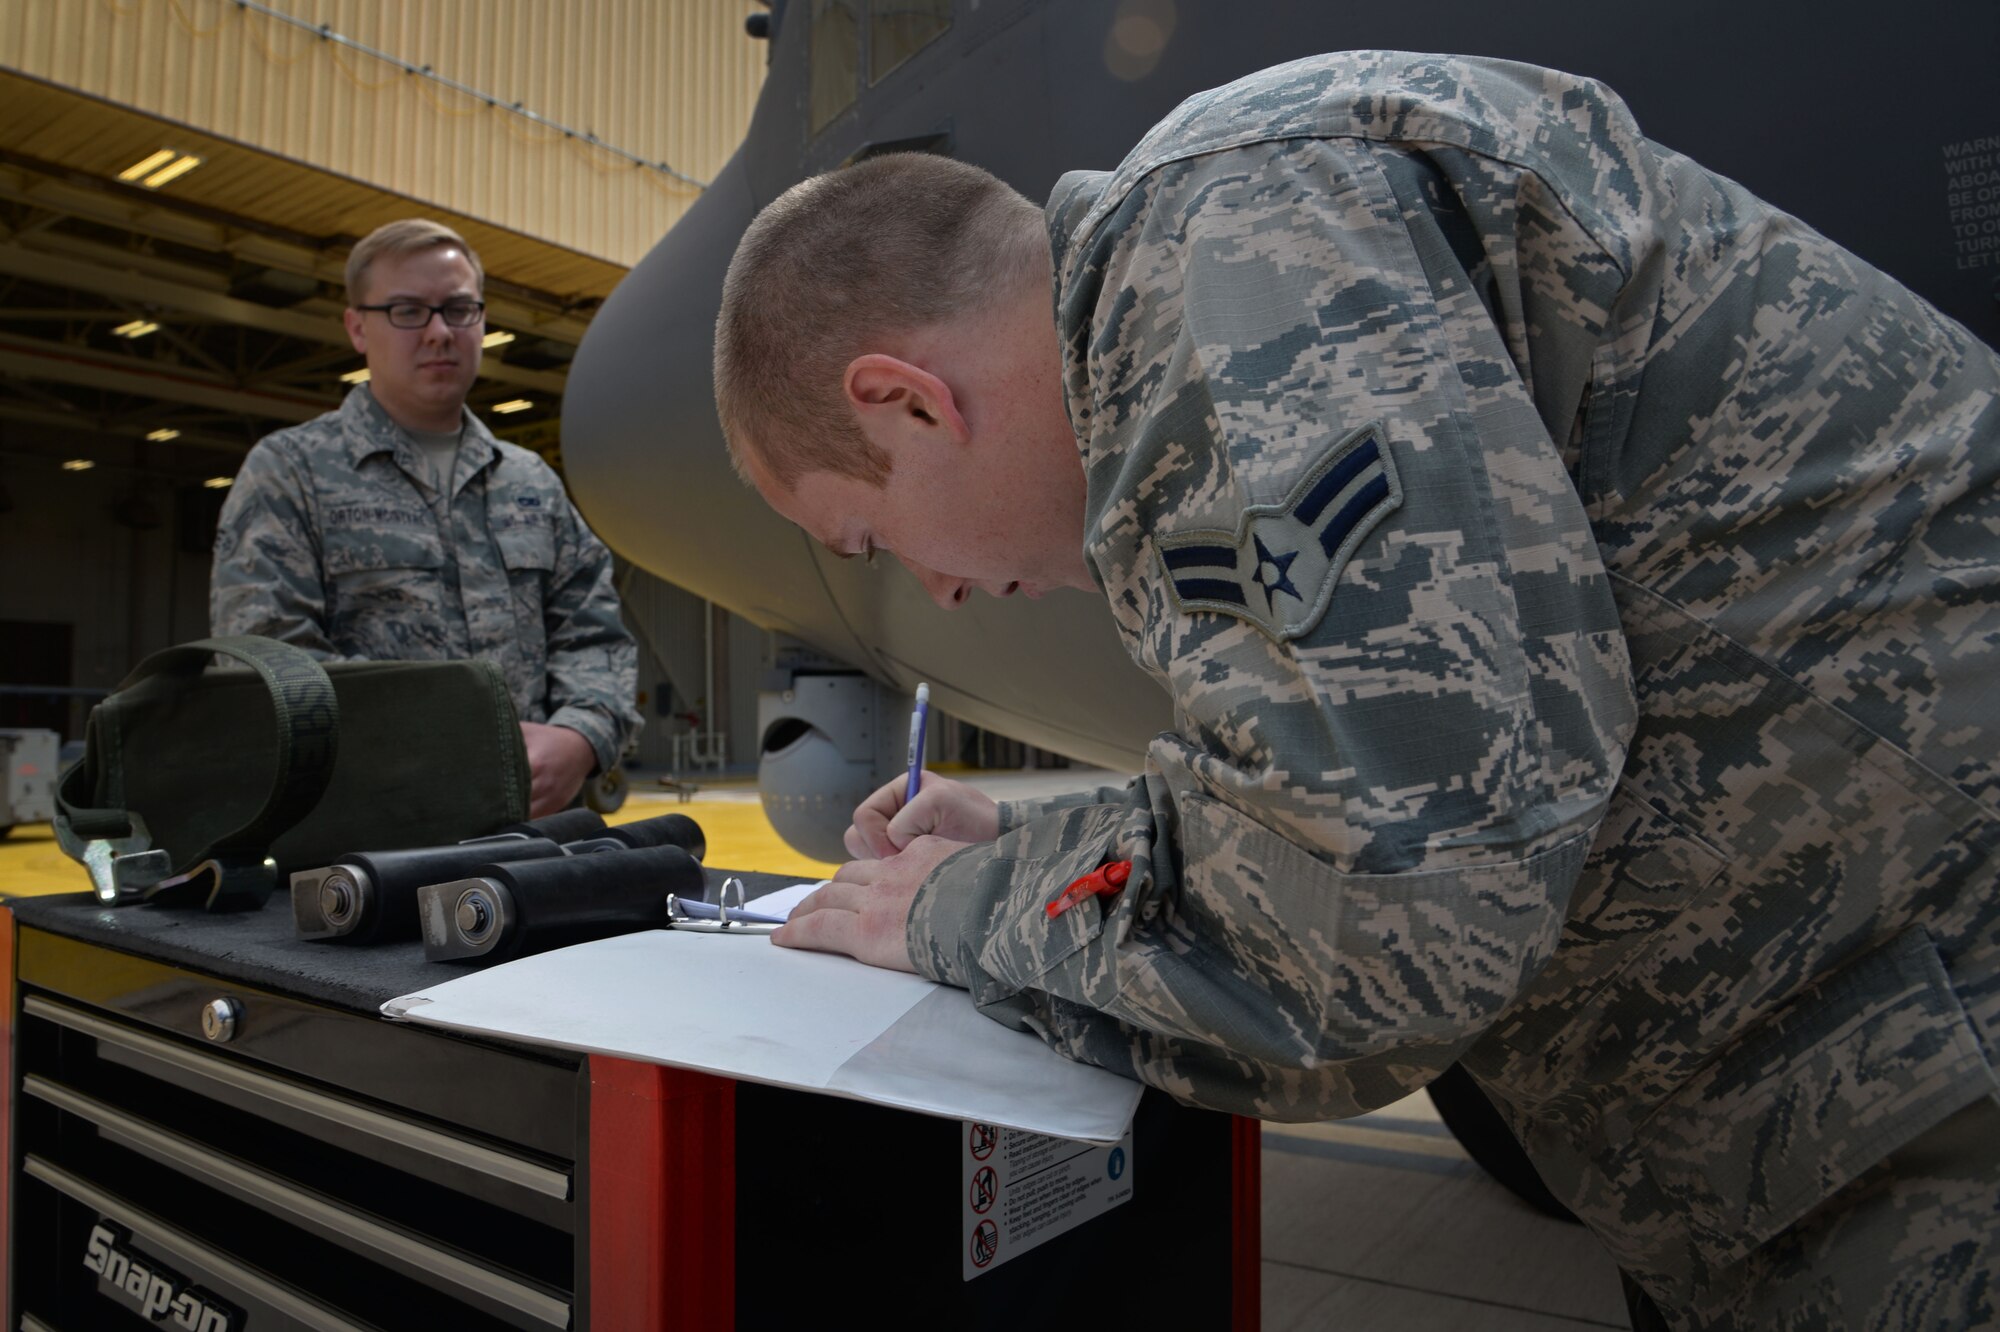 U.S. Air Force Airman 1st Class David Coulter, 27th Special Operations Maintenance Squadron AC-130 armament shop, annotates information in aircraft forms pertaining to what was loaded during a load competition April 6, 2015 at Cannon Air Force Base, N.M. Both teams moved quickly and efficiently to claim the title of Air Force Special Operations Command’s first load crew of the year. (U.S. Air Force photo/Staff Sgt. Alex Mercer)